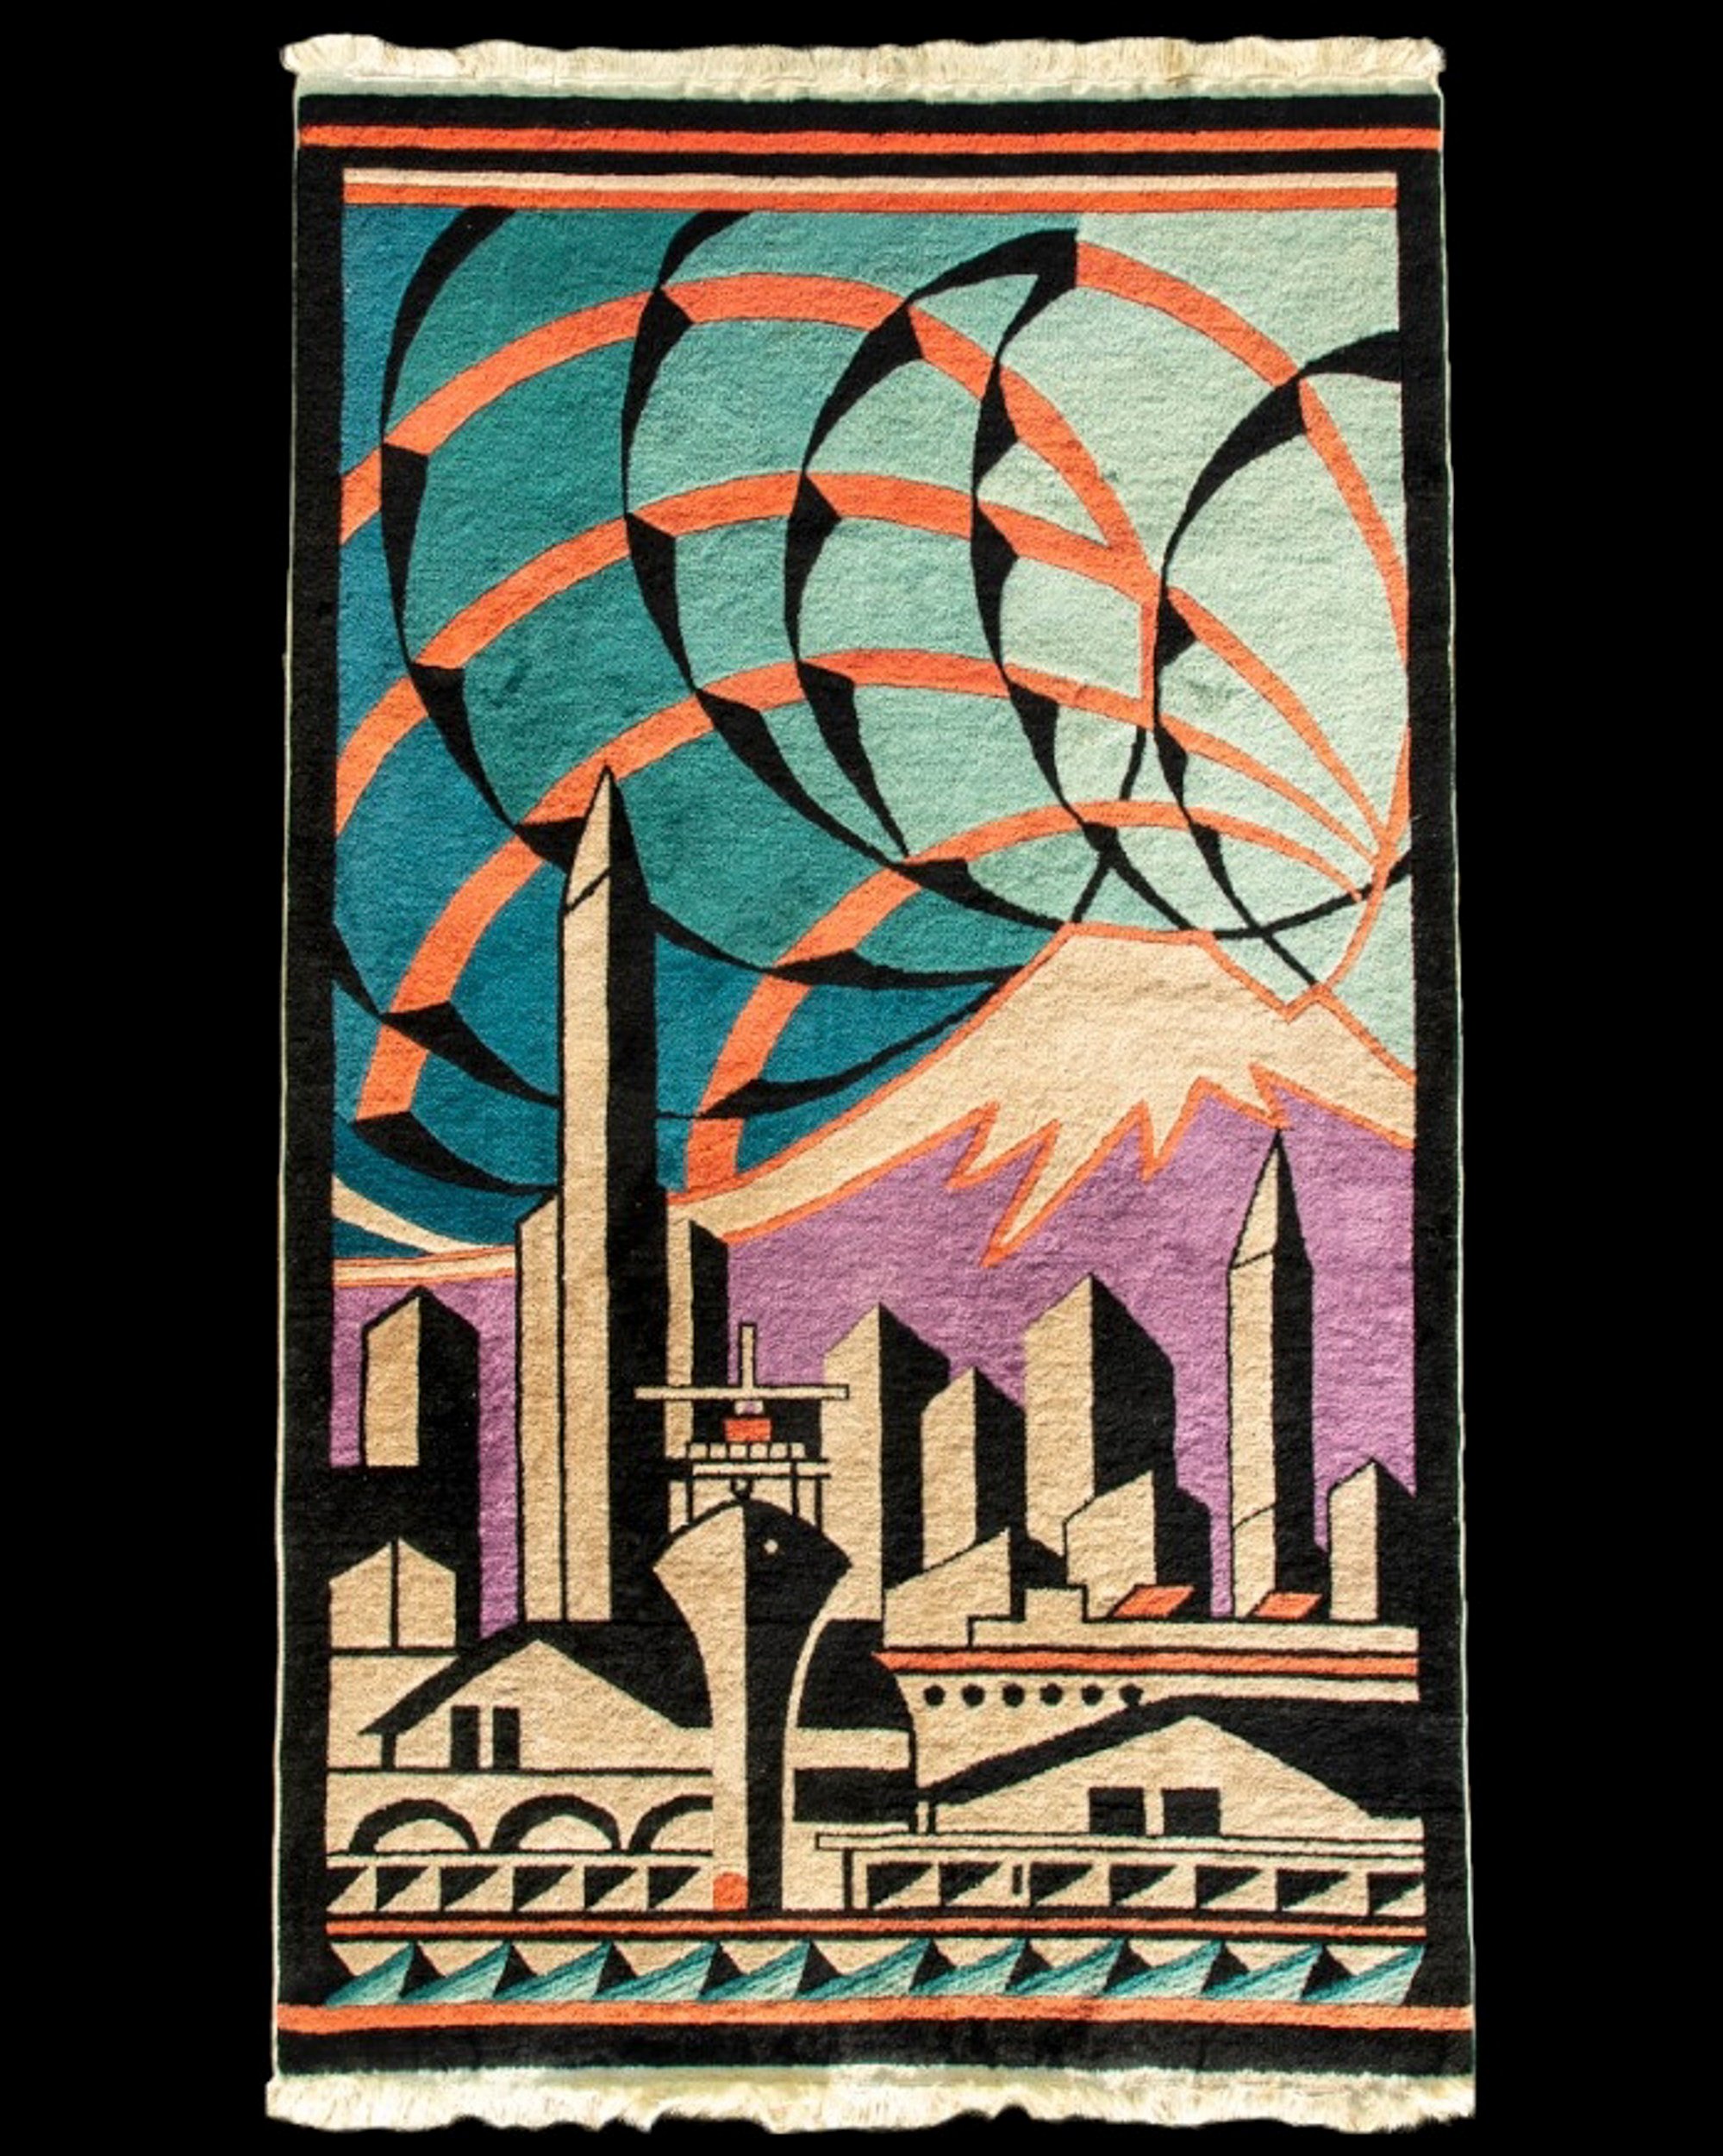 Orre Nelson Nobles (1894–1967) designed rugs for the Fette-Li Company, including the vibrant depiction of the Seattle waterfront, circa 1930. One Chinese company sought to successfully marry traditionally woven carpets with new avant garde designs – the Fette-Li Rug Company of Beijing and Tianjin.  Founded in 1927 the firm was a coming together of a highly-skilled rug manufacturer – Li Meng Shu – and an American entrepreneur living in Beijing, Helen Fette.